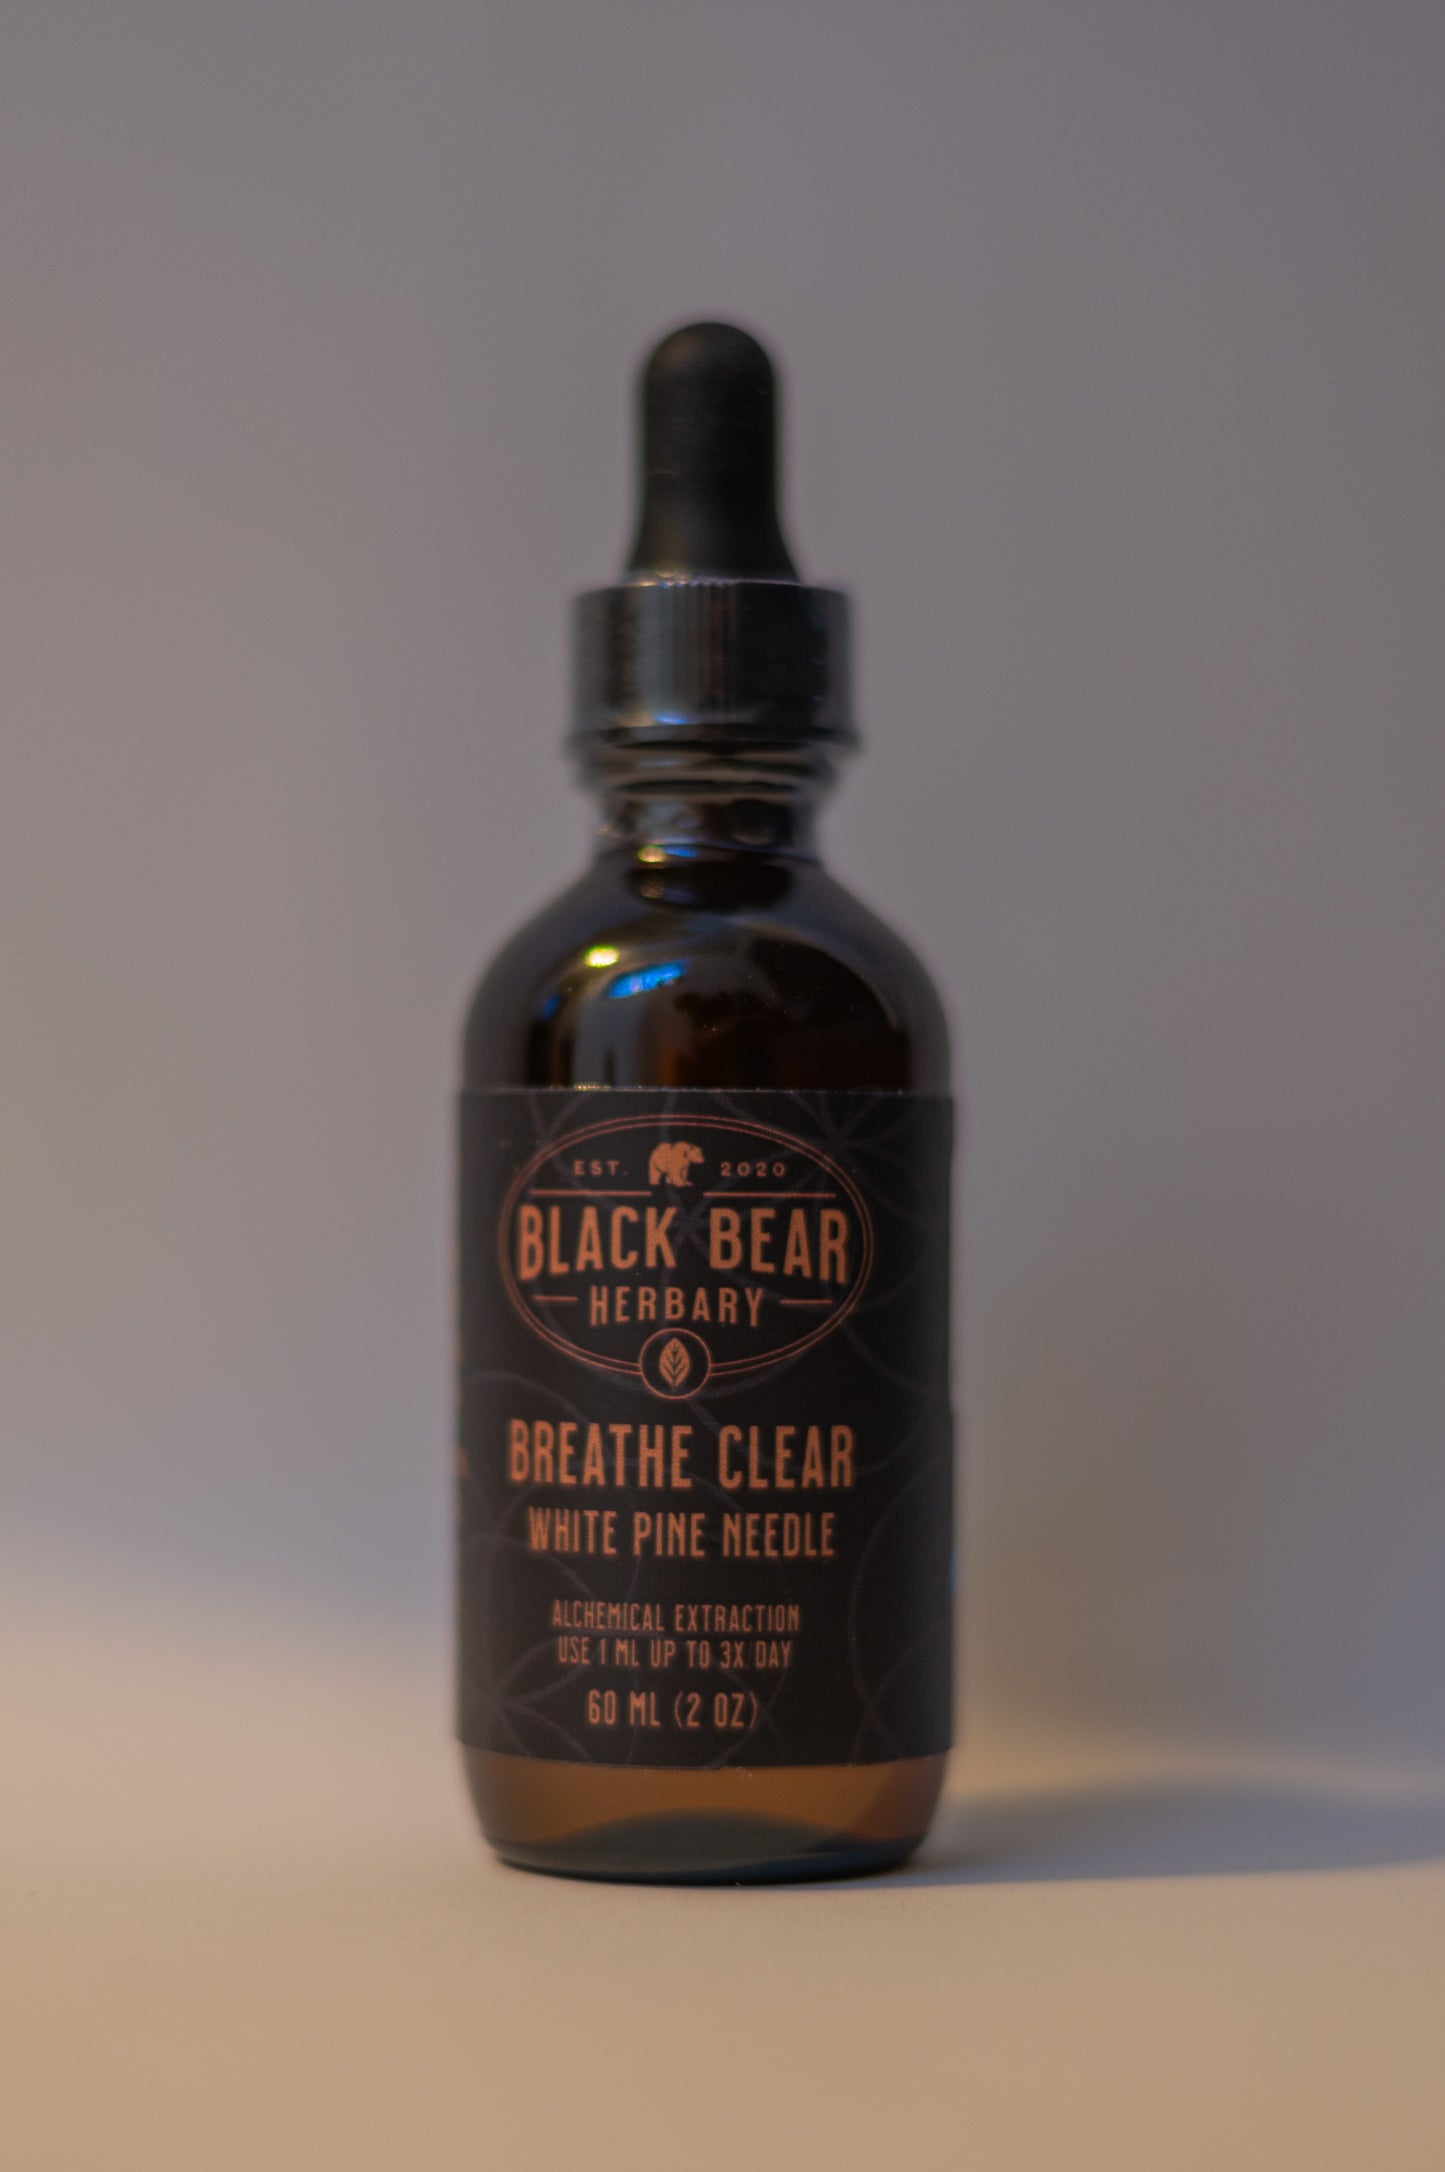 Alchemical Extractions - Black Bear Herbary